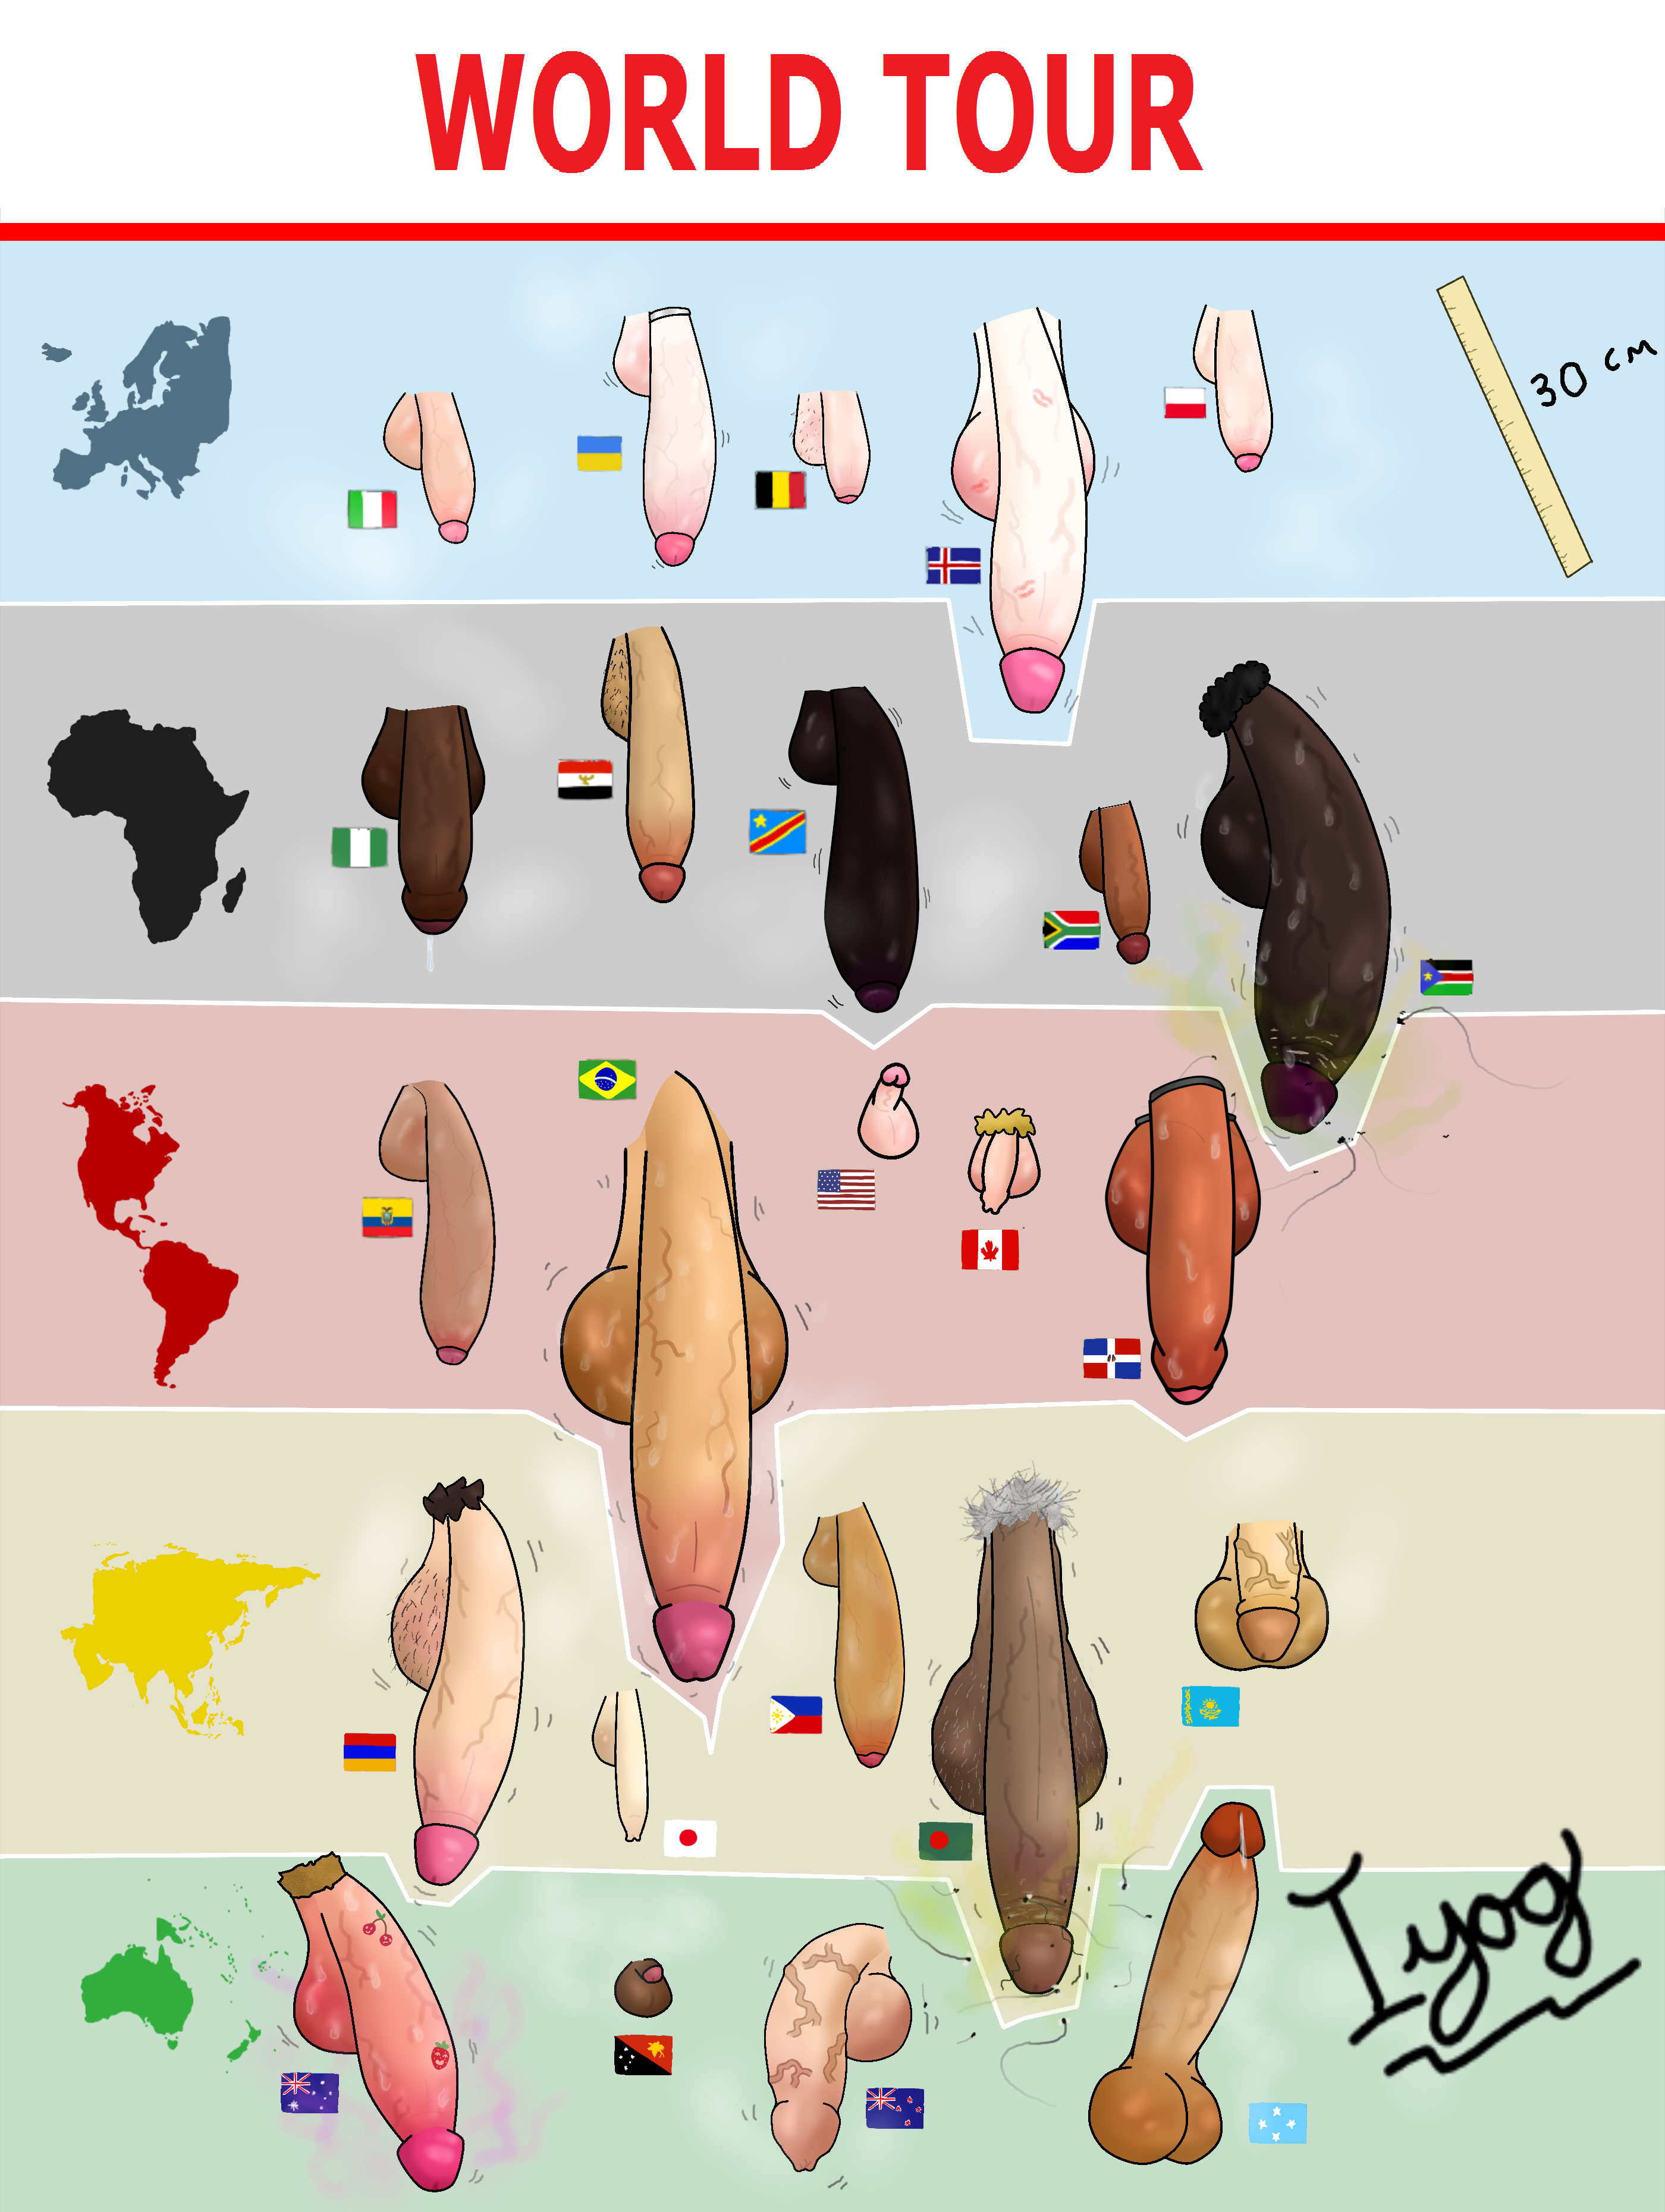 Different penis sizes